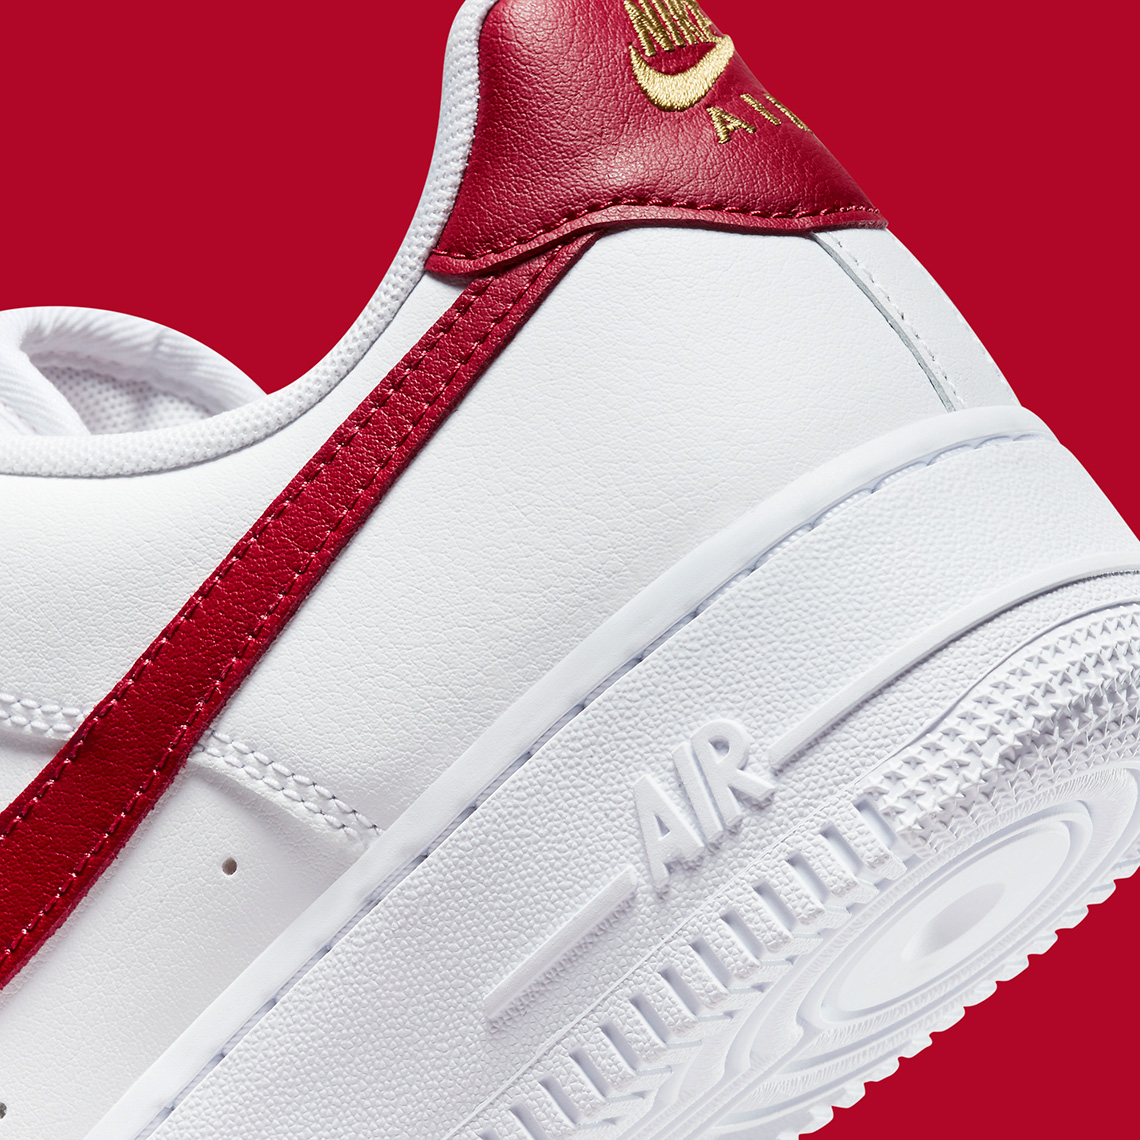 Nike Air Force 1 White Red Gold CZ0270-104 - SoleSnk